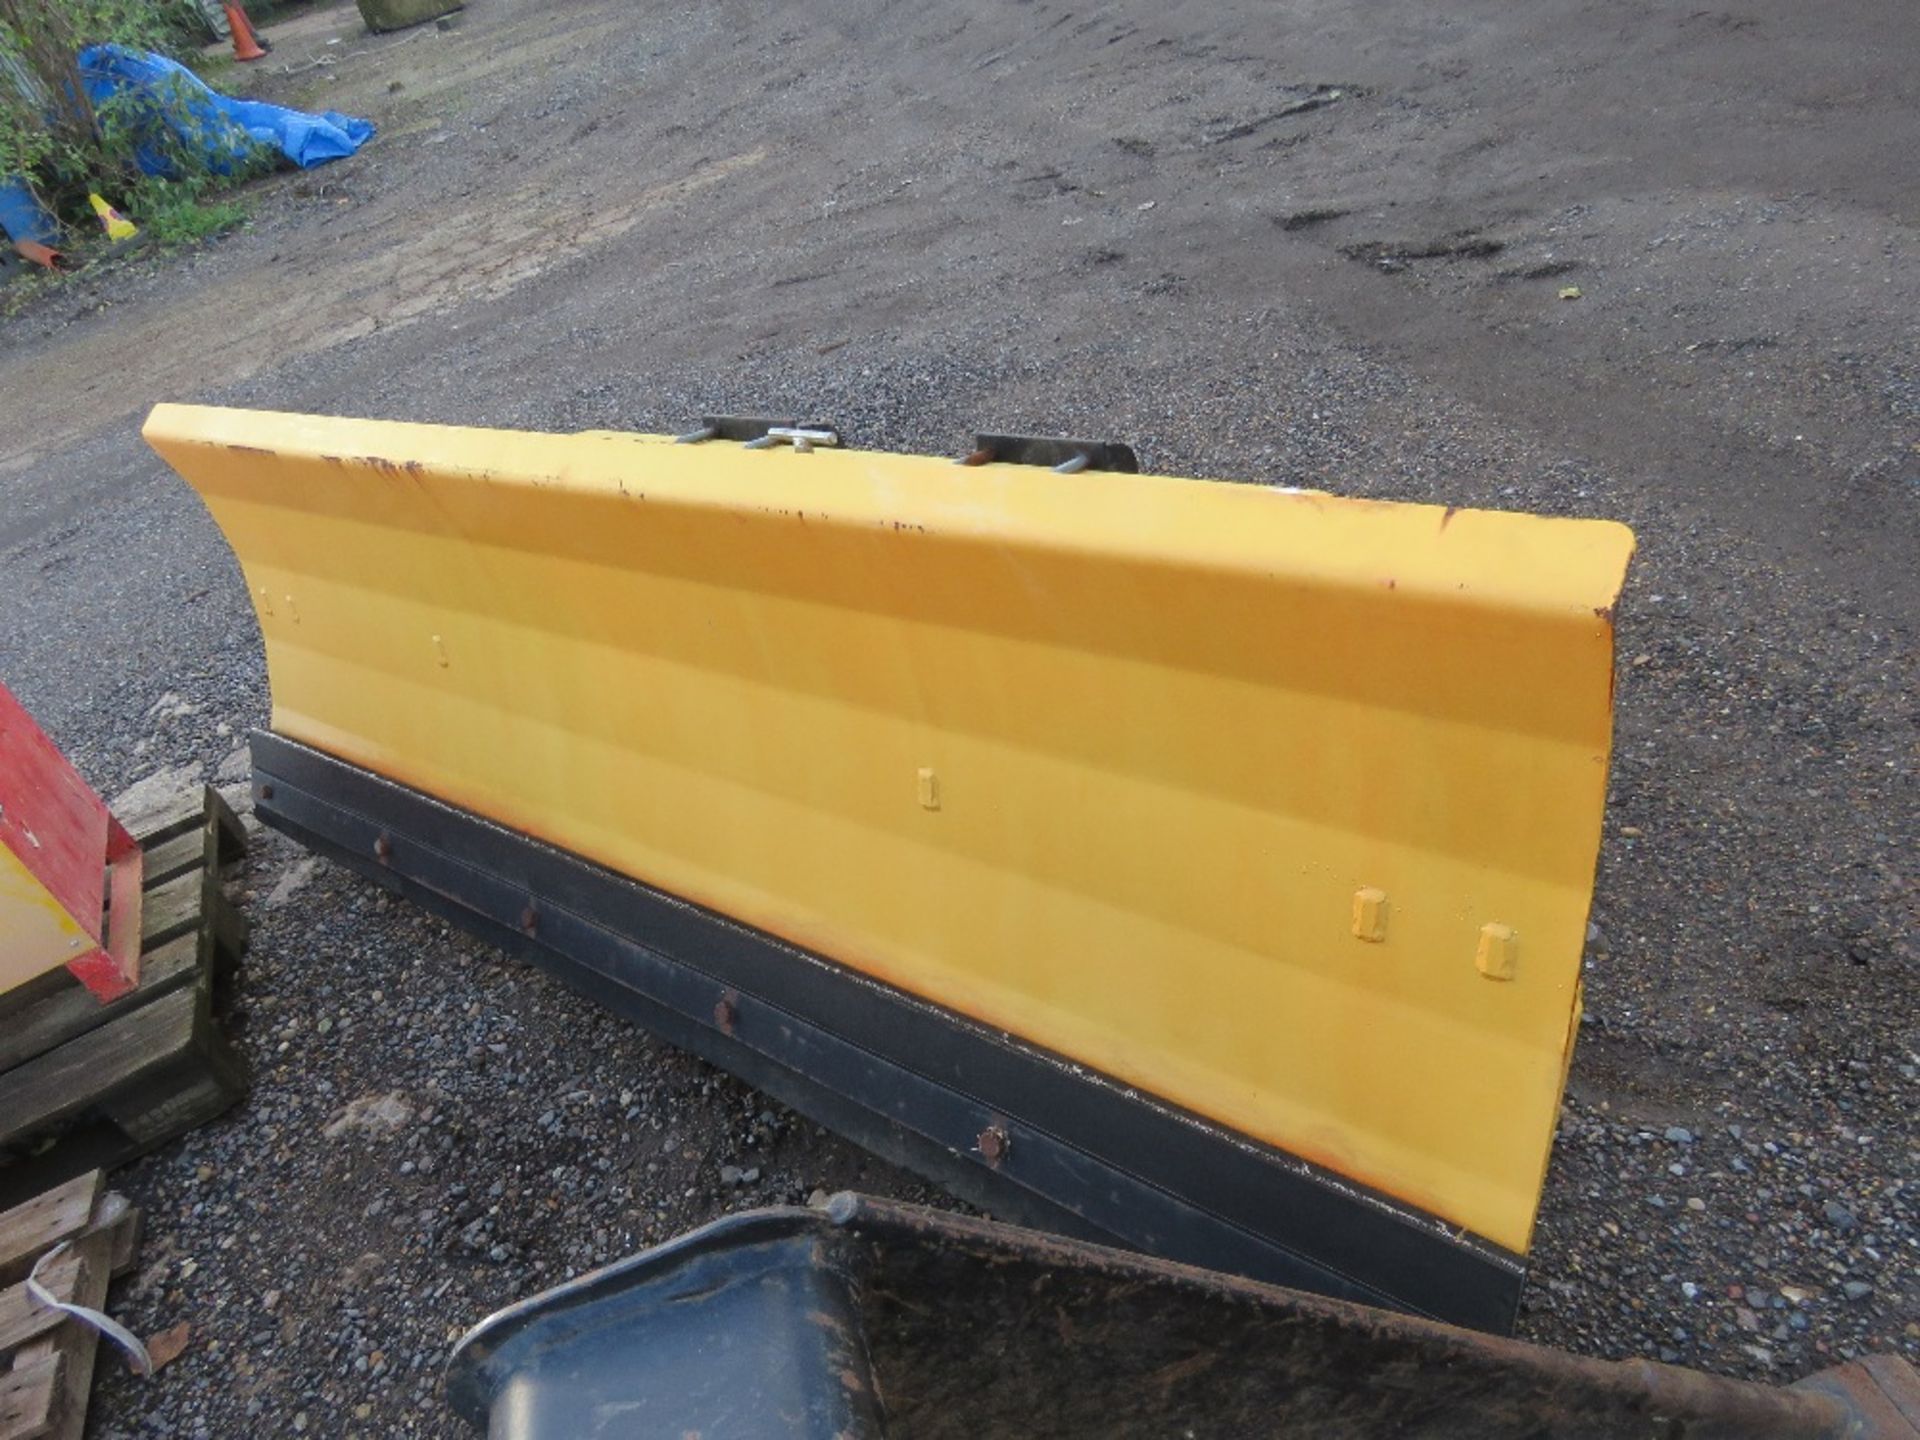 ALBUTT 7FT WIDTH ADJUSTABLE ANGLE SNOW PLOUGH WITH RUBBER BLADE, SUITABLE FOR JCB 515-40 LOADER OR S